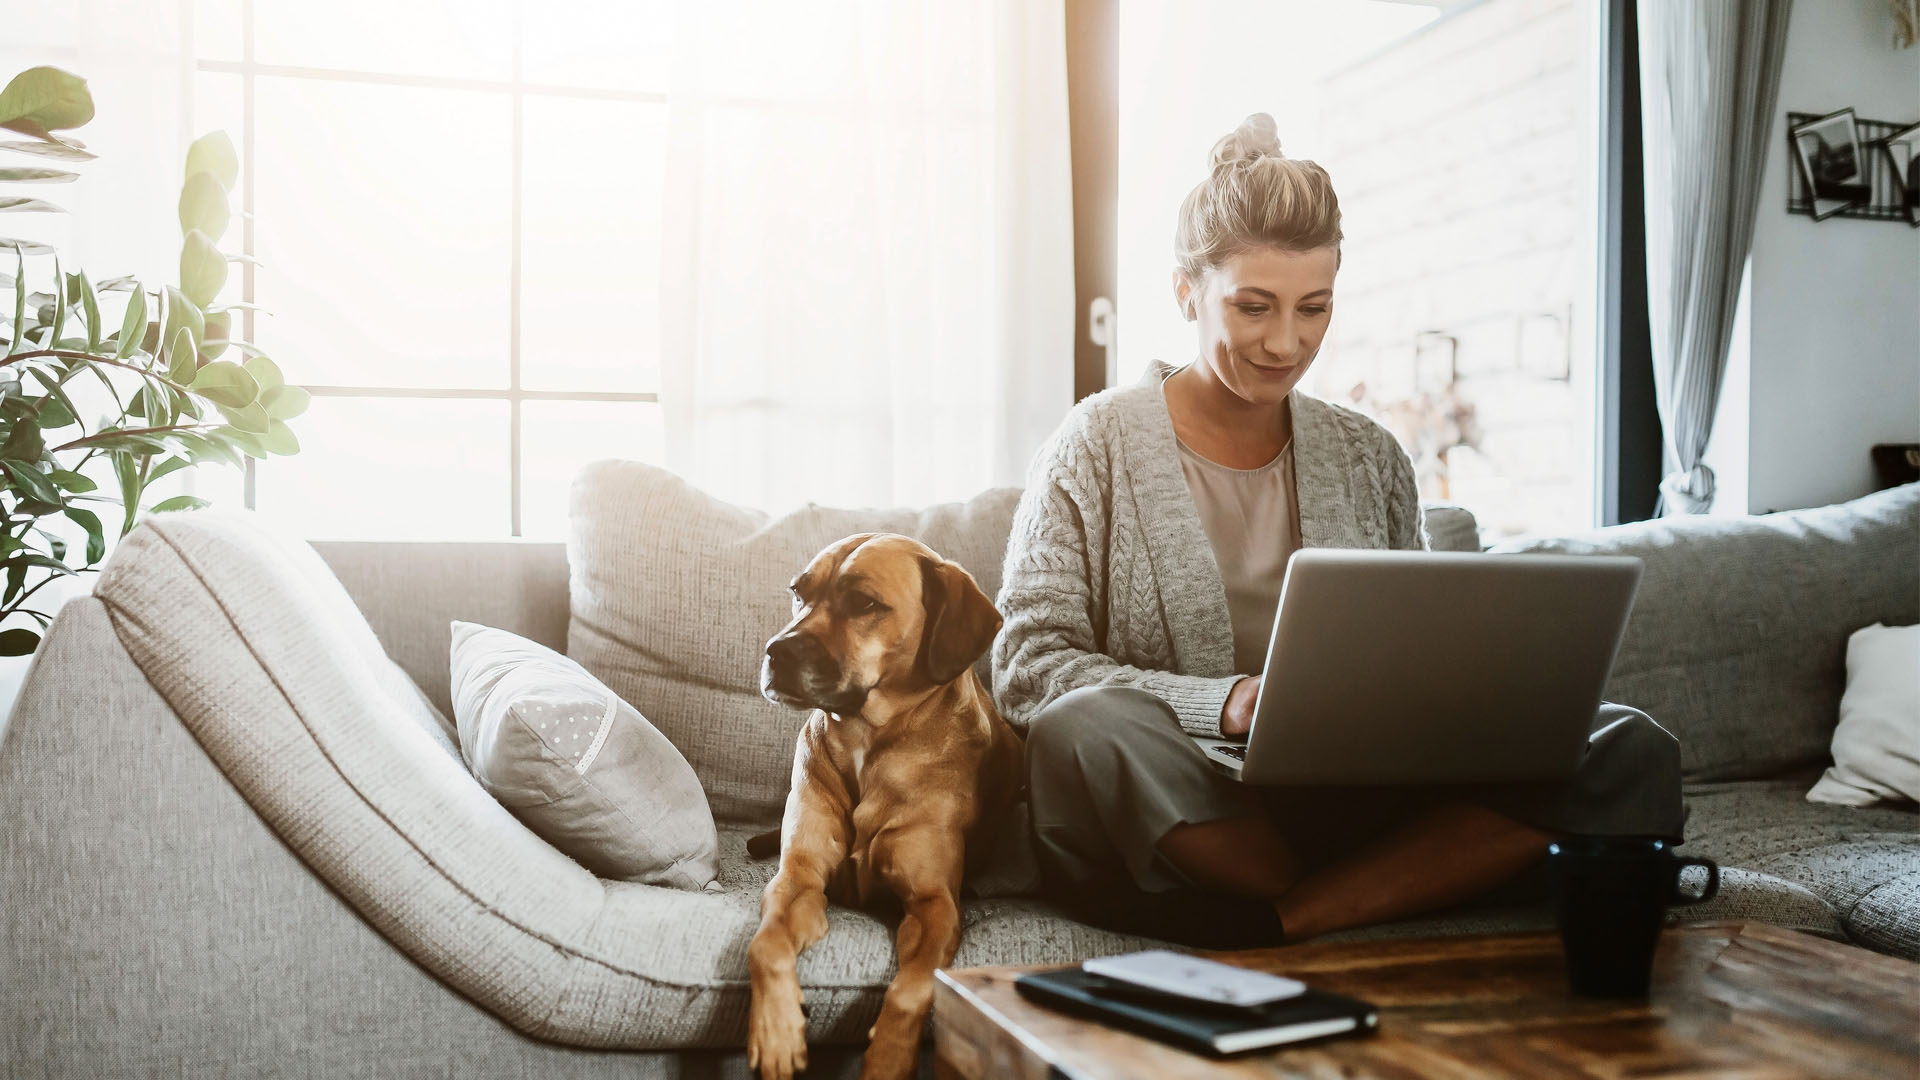 Image showing a woman using a laptop on the couch with her dog sitting next to her